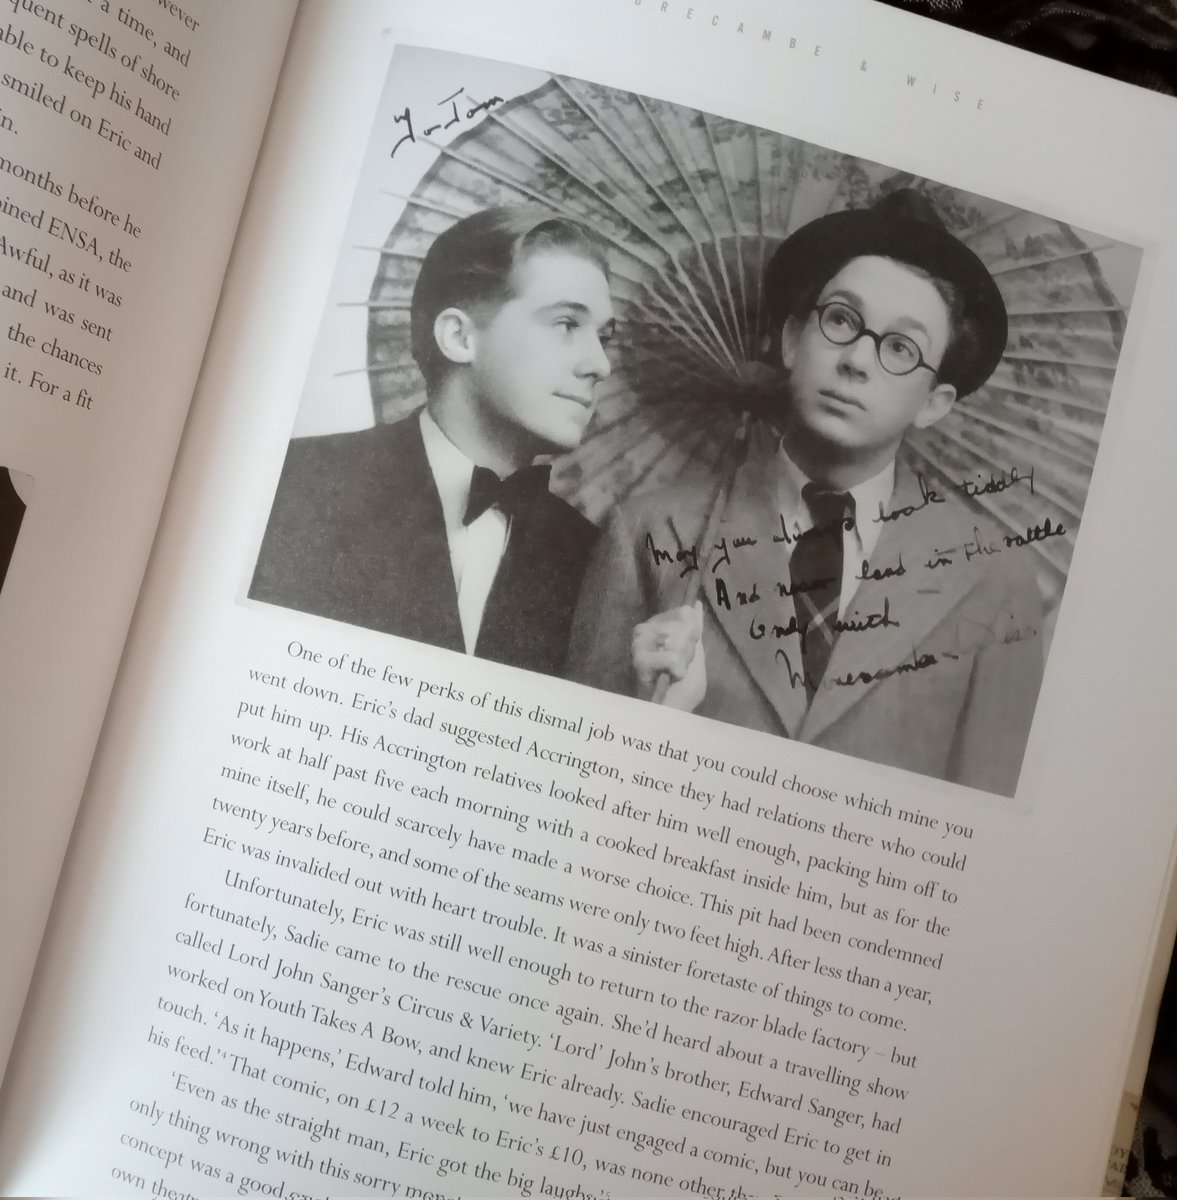 Today's read. Eric Morecambe Unseen, edited by William Cook (2005).
#MorecambeAndWise #Read